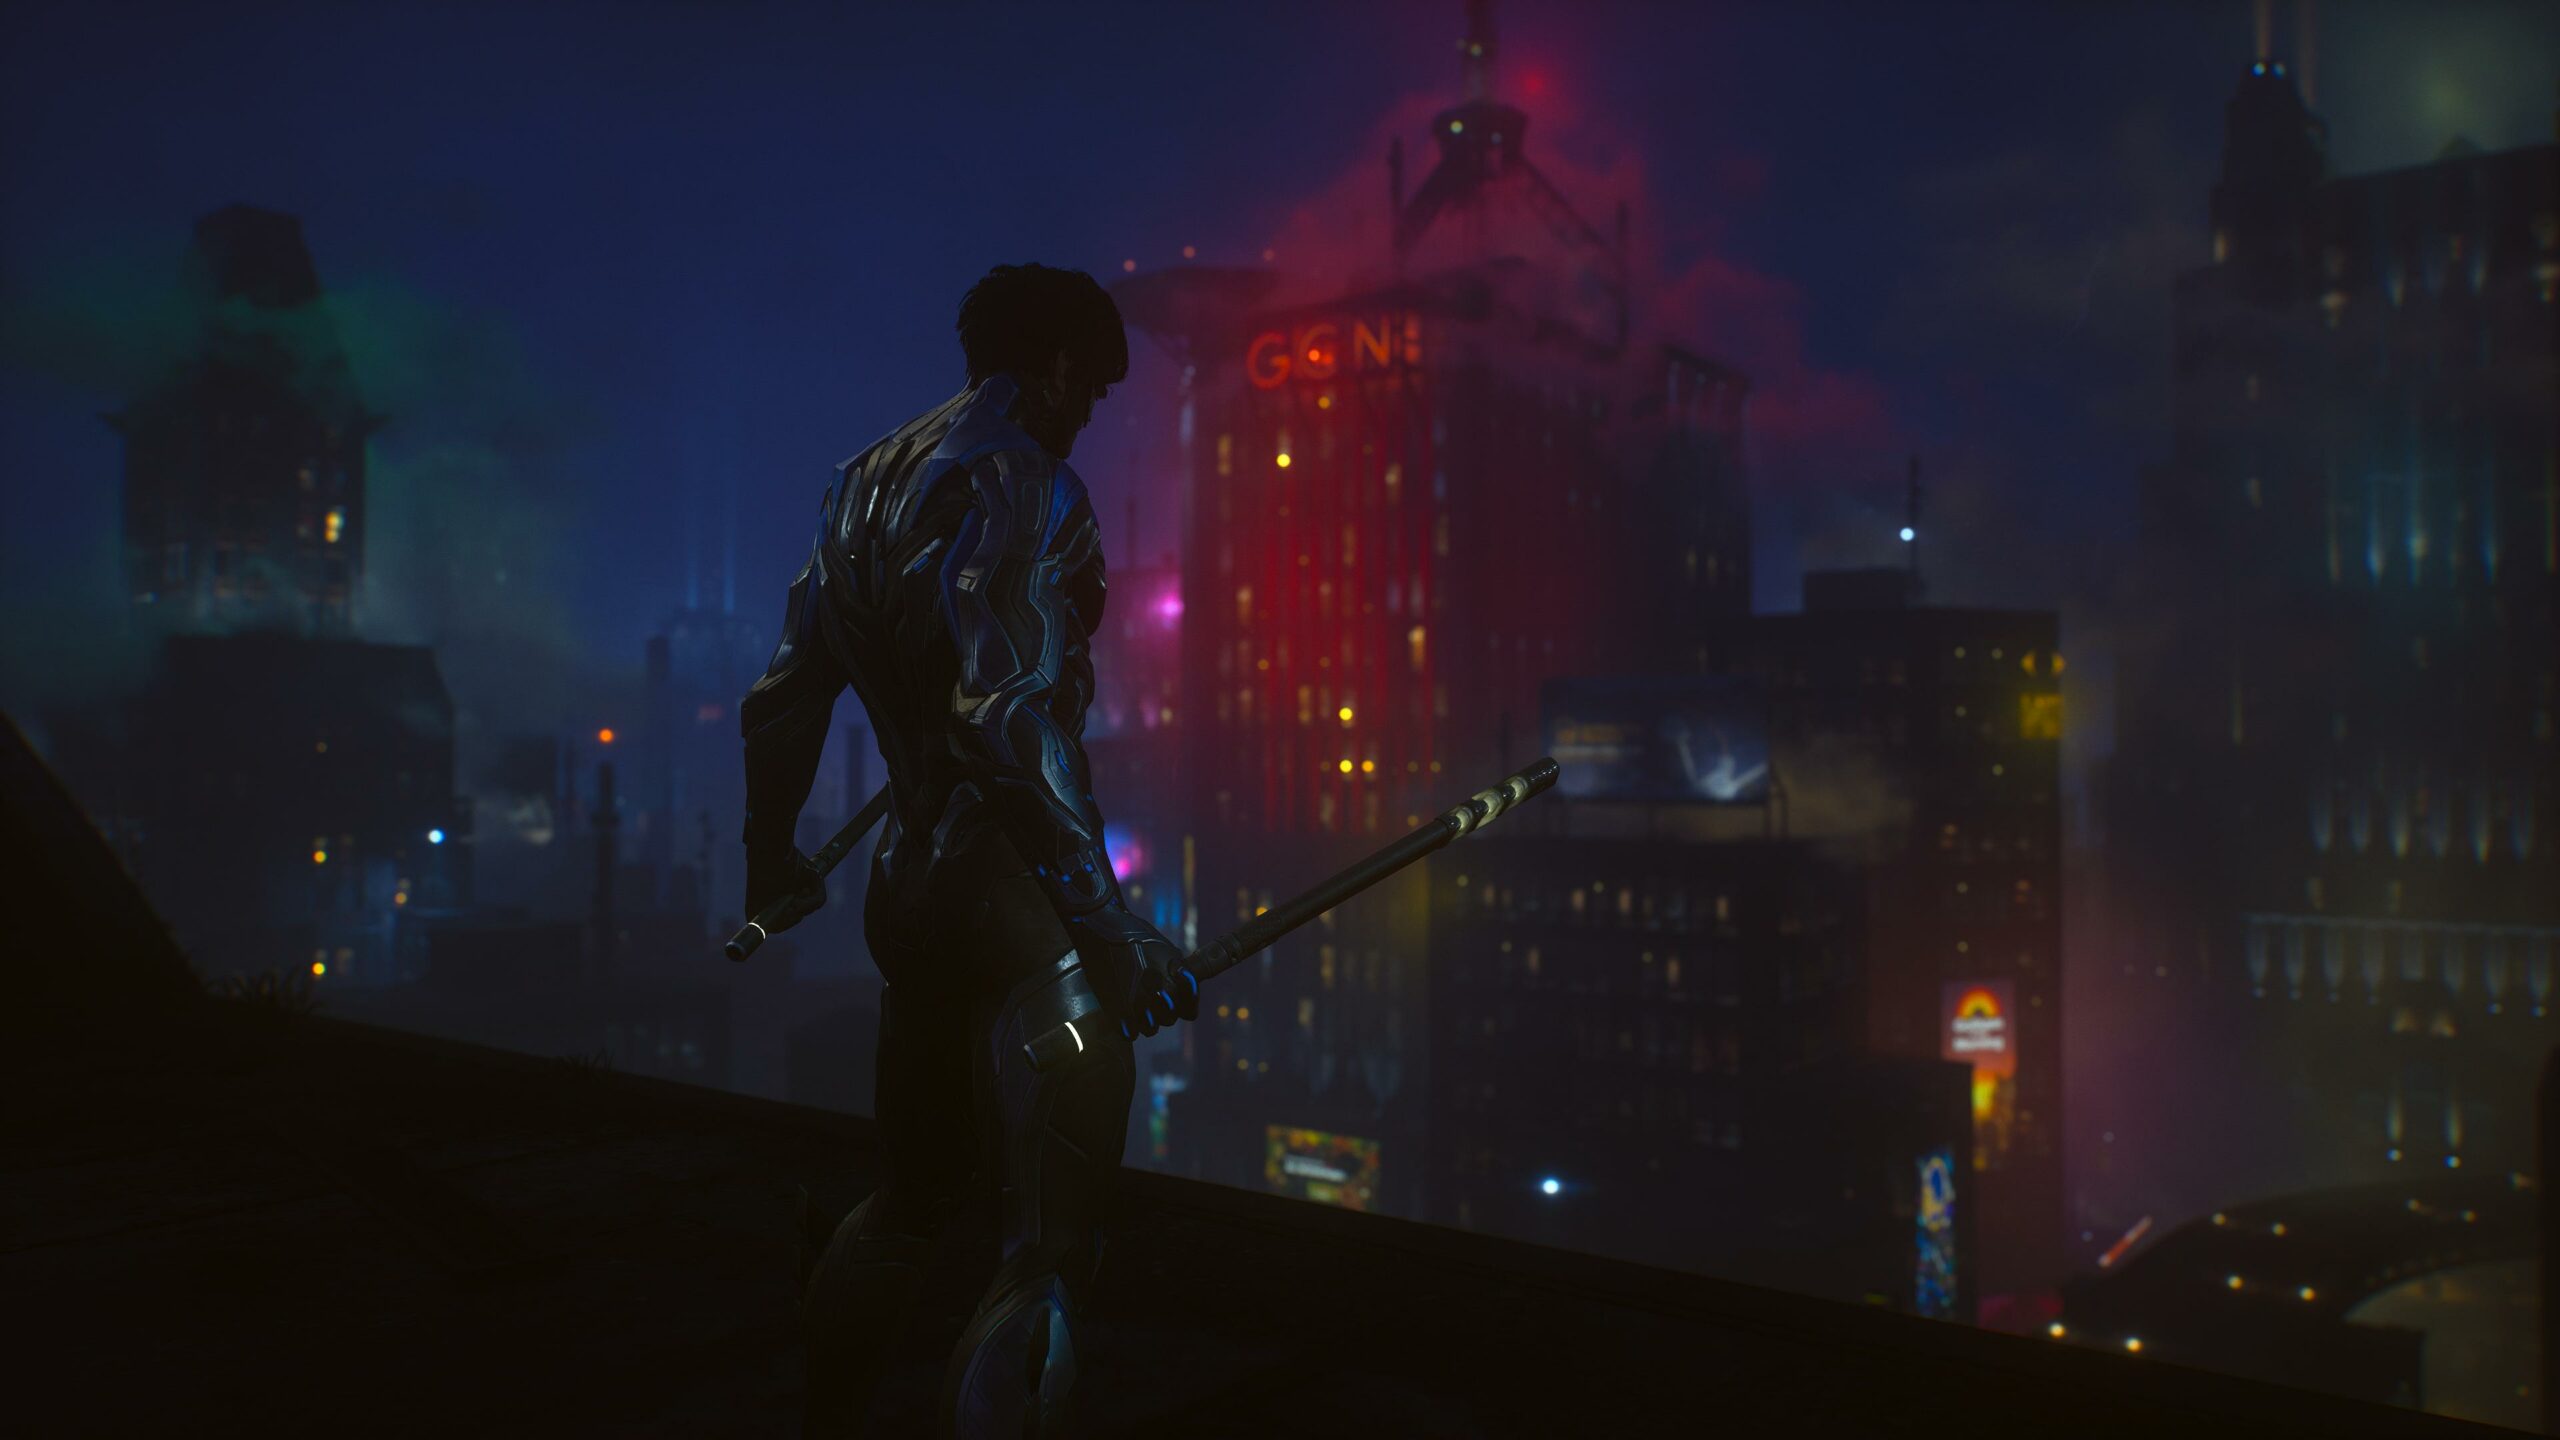 Nightwing on top of the Belfry Tower